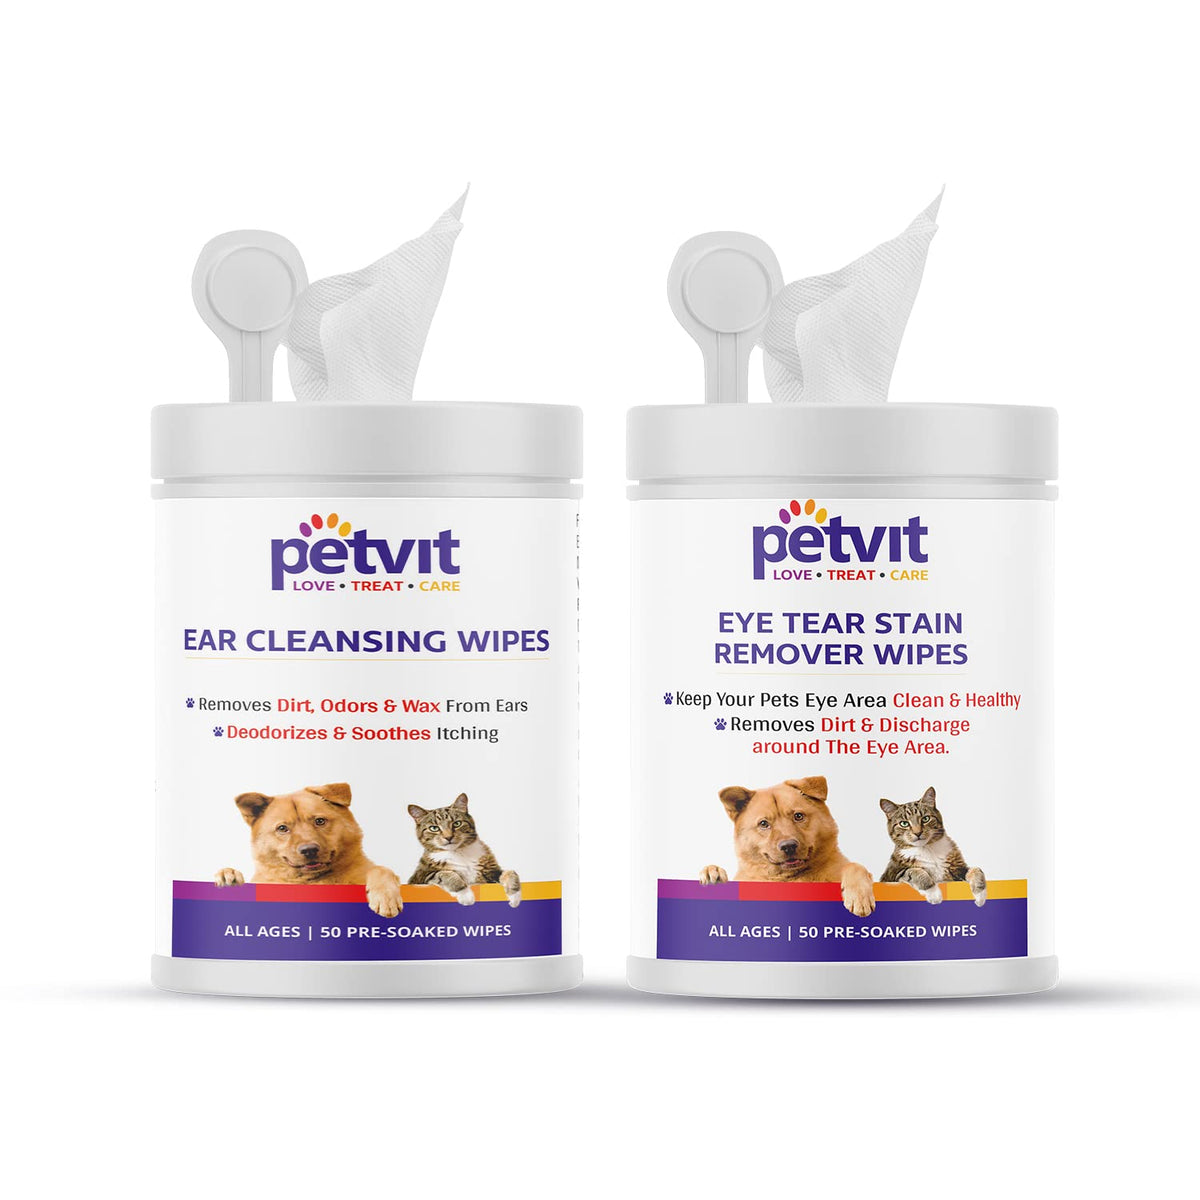 Petvit Ear Cleansing Wipes & Eye Tear Stain Remover Wipes - Fragrance Less 50+50 Wipes (Combo)